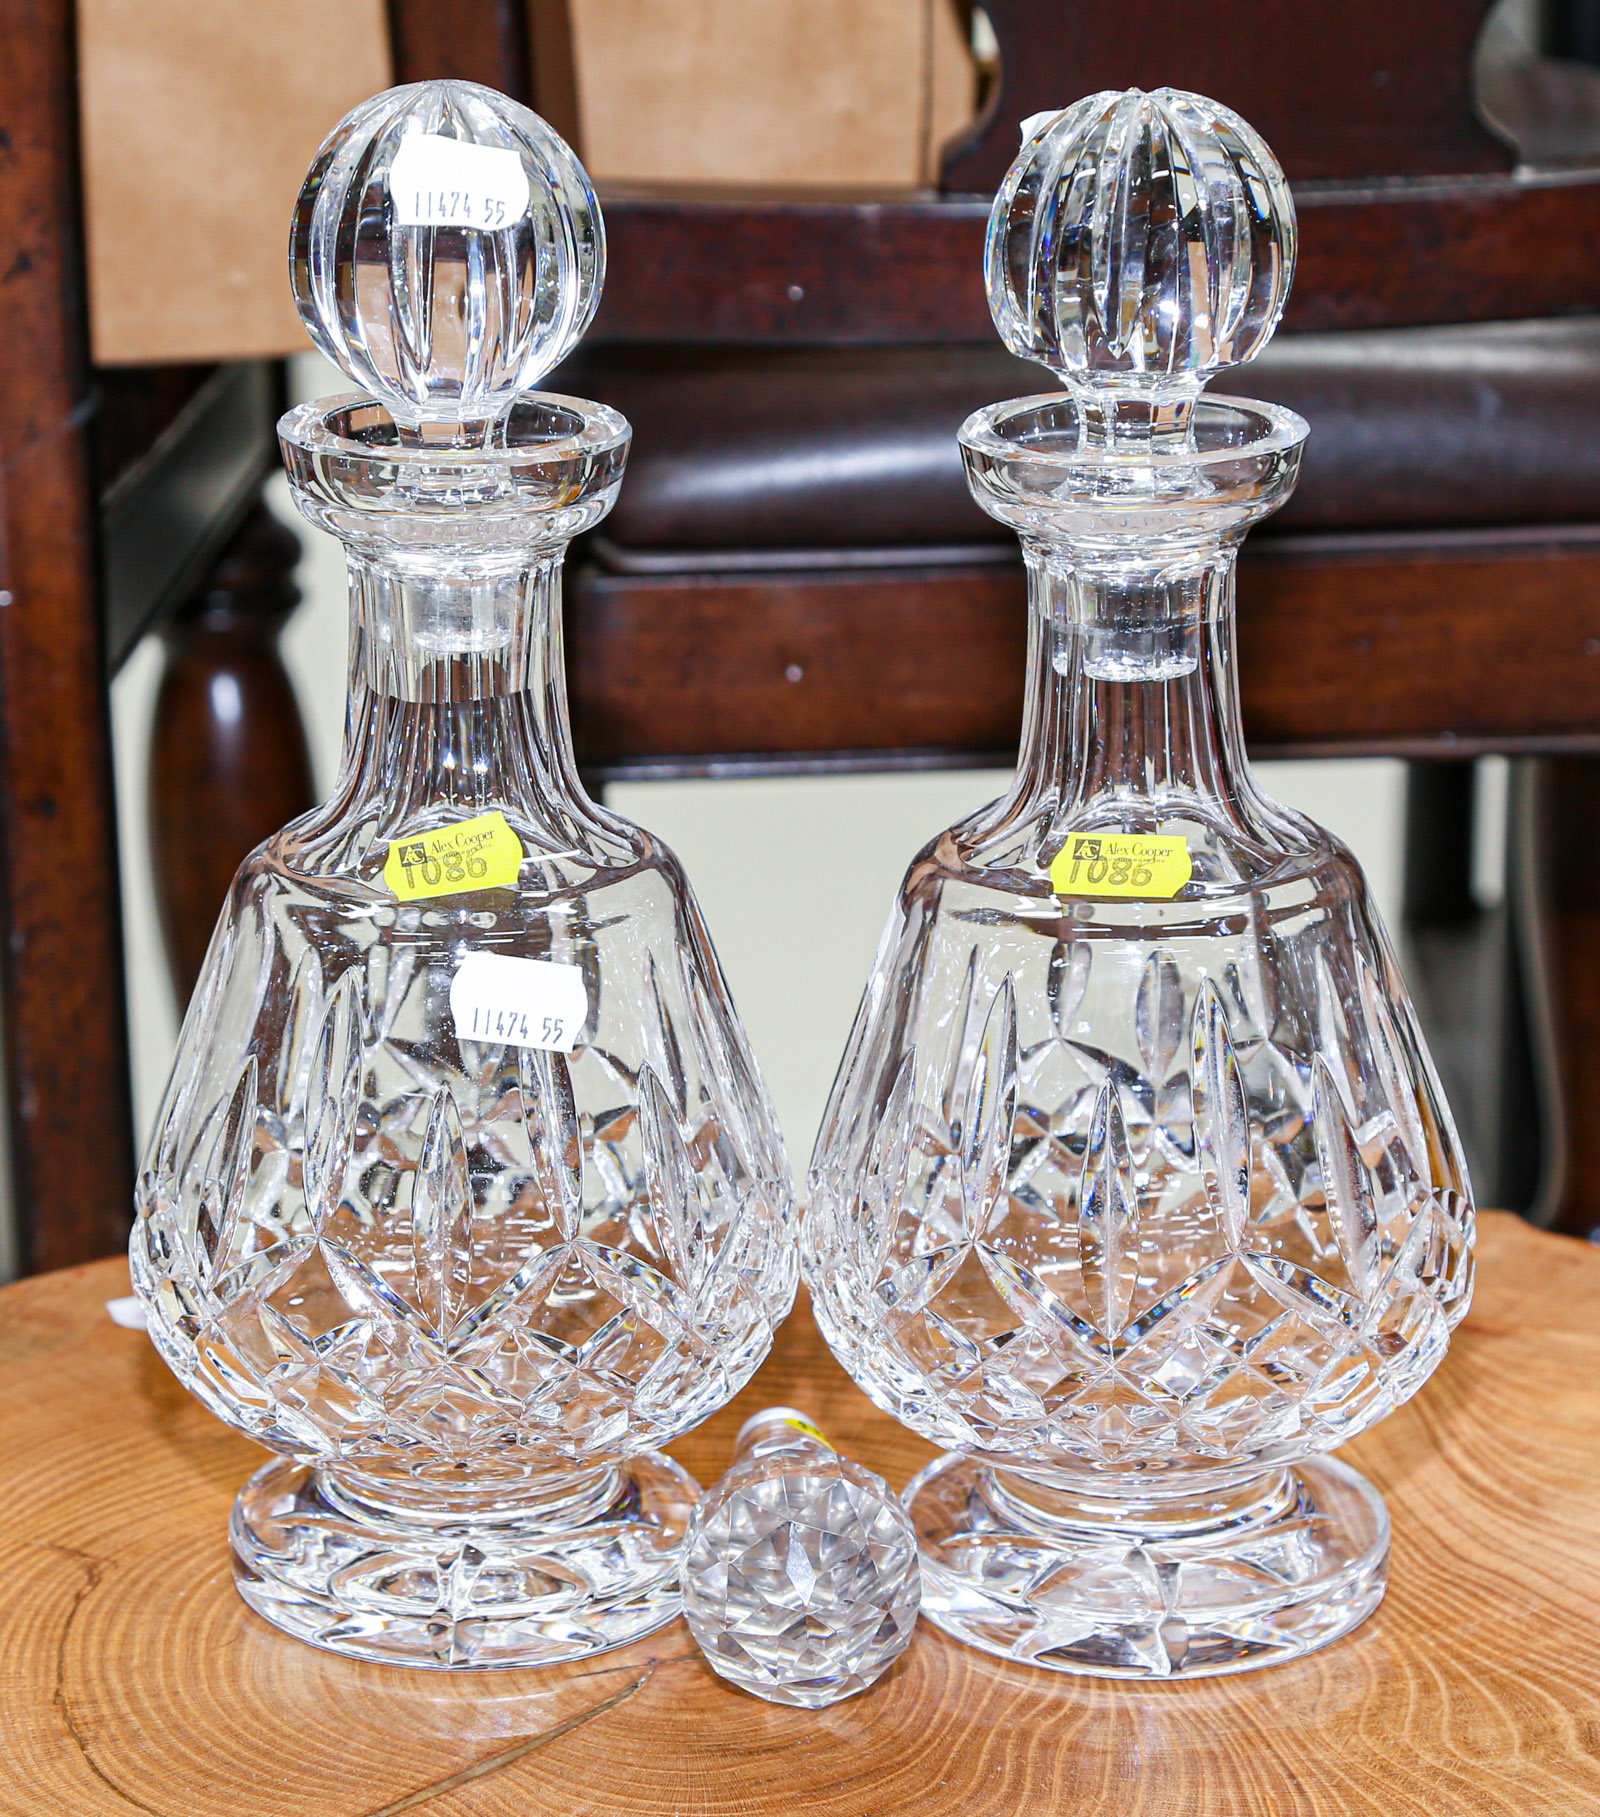 TWO WATERFORD DECANTERS With additional 36a3de